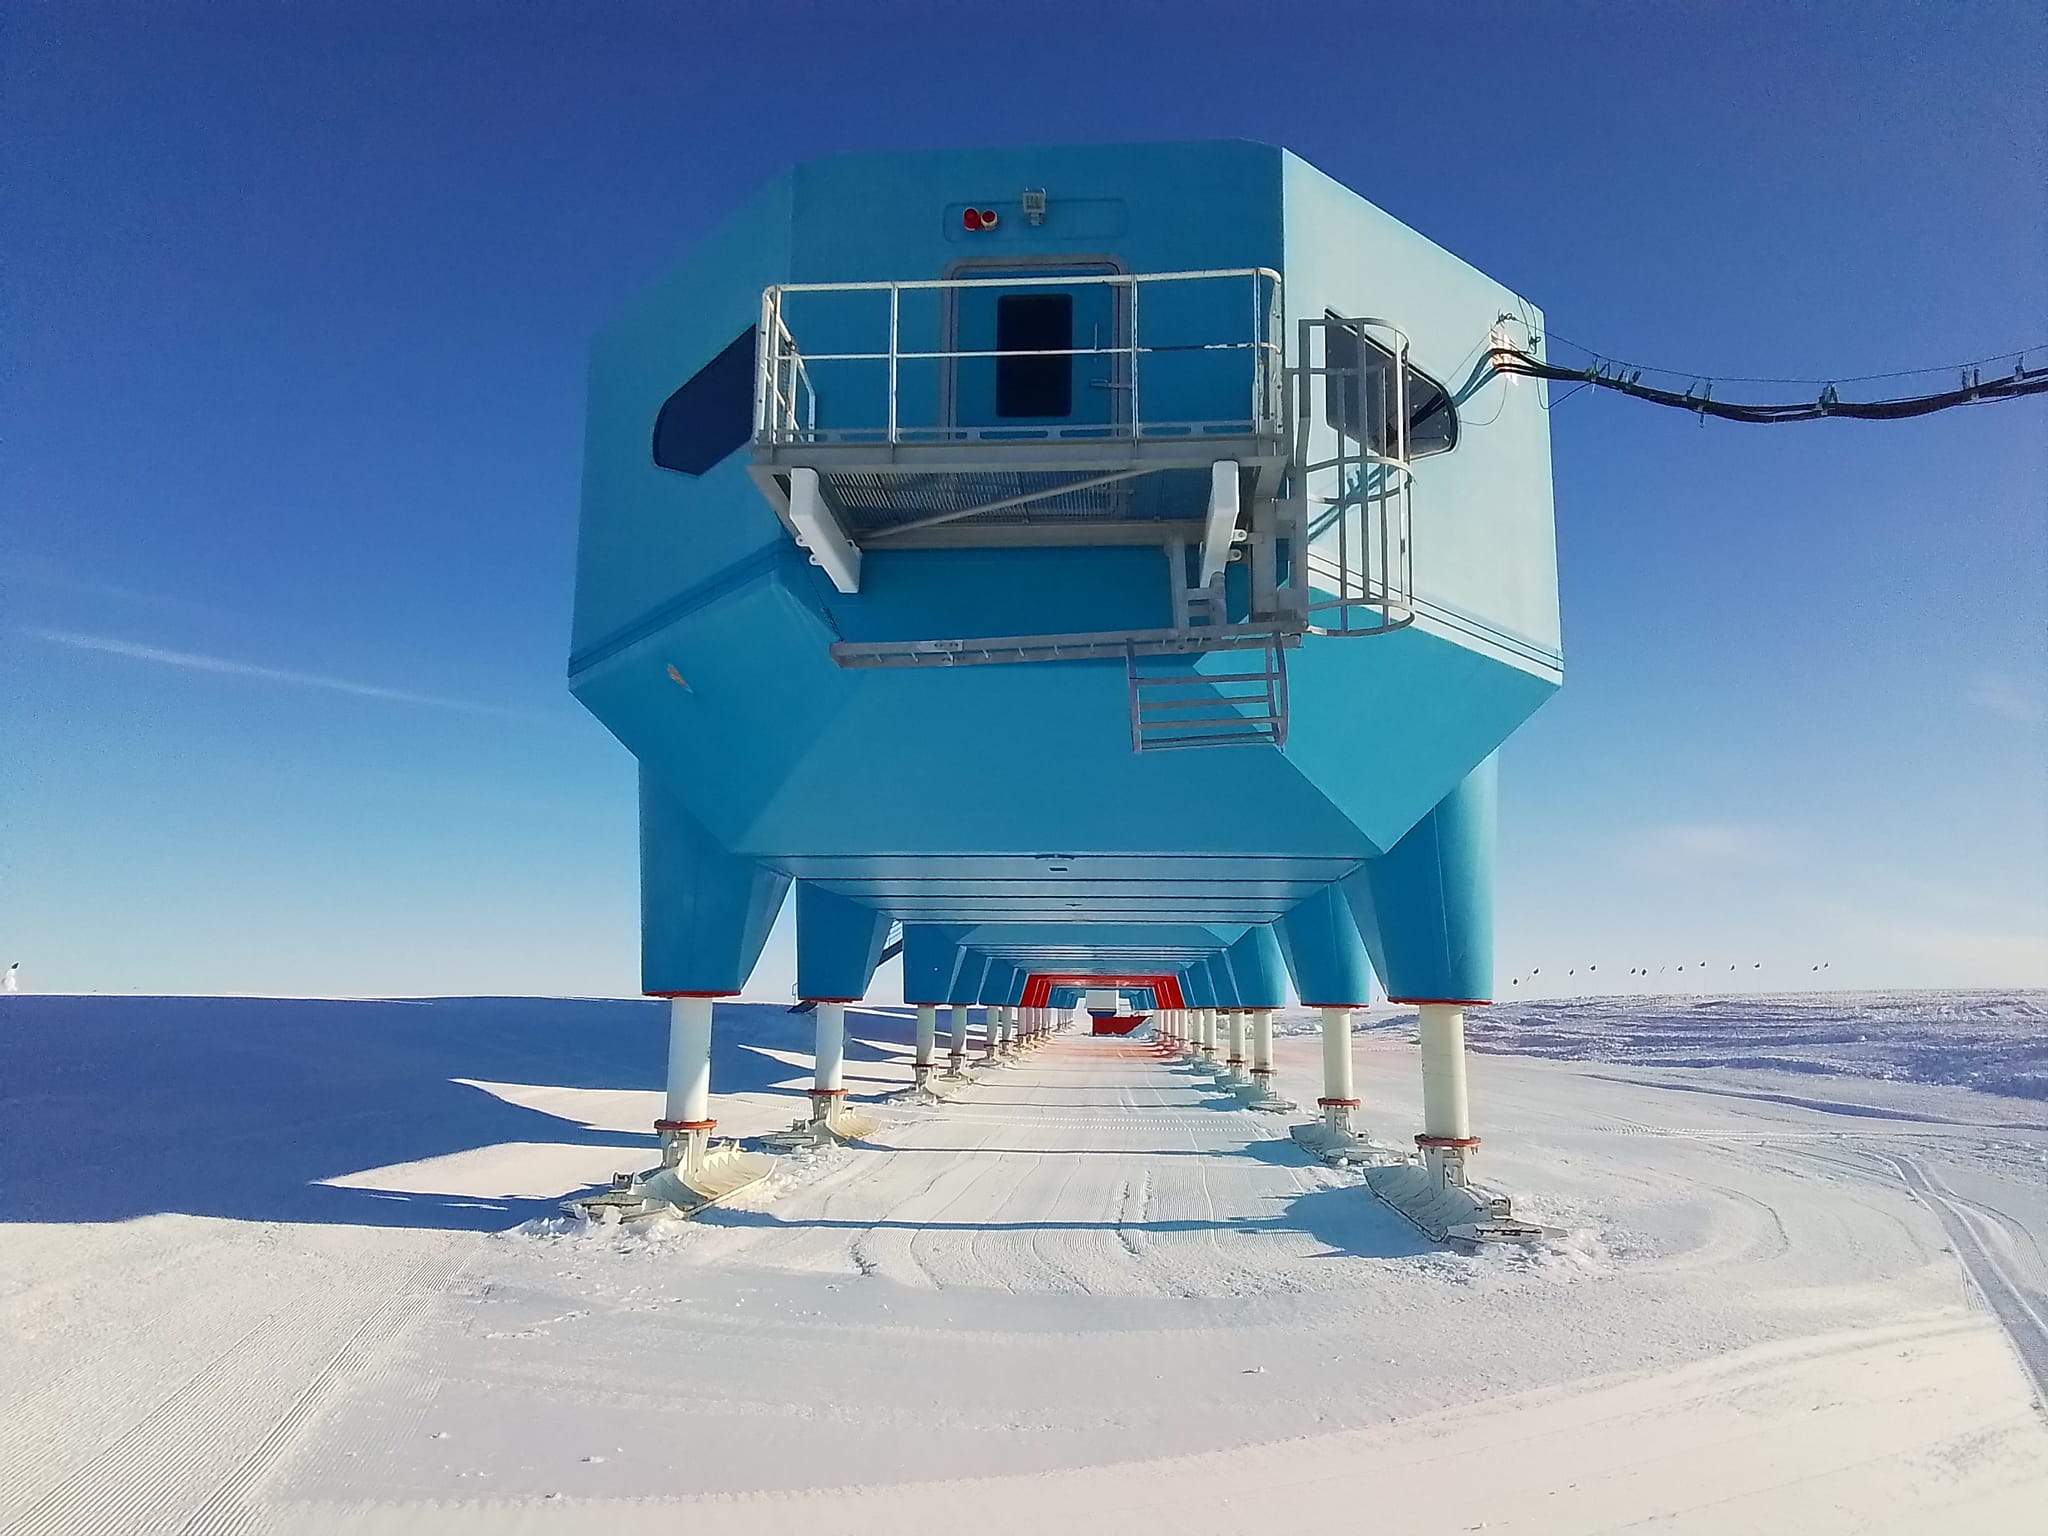 A large blue angular building on stilts stands on snow